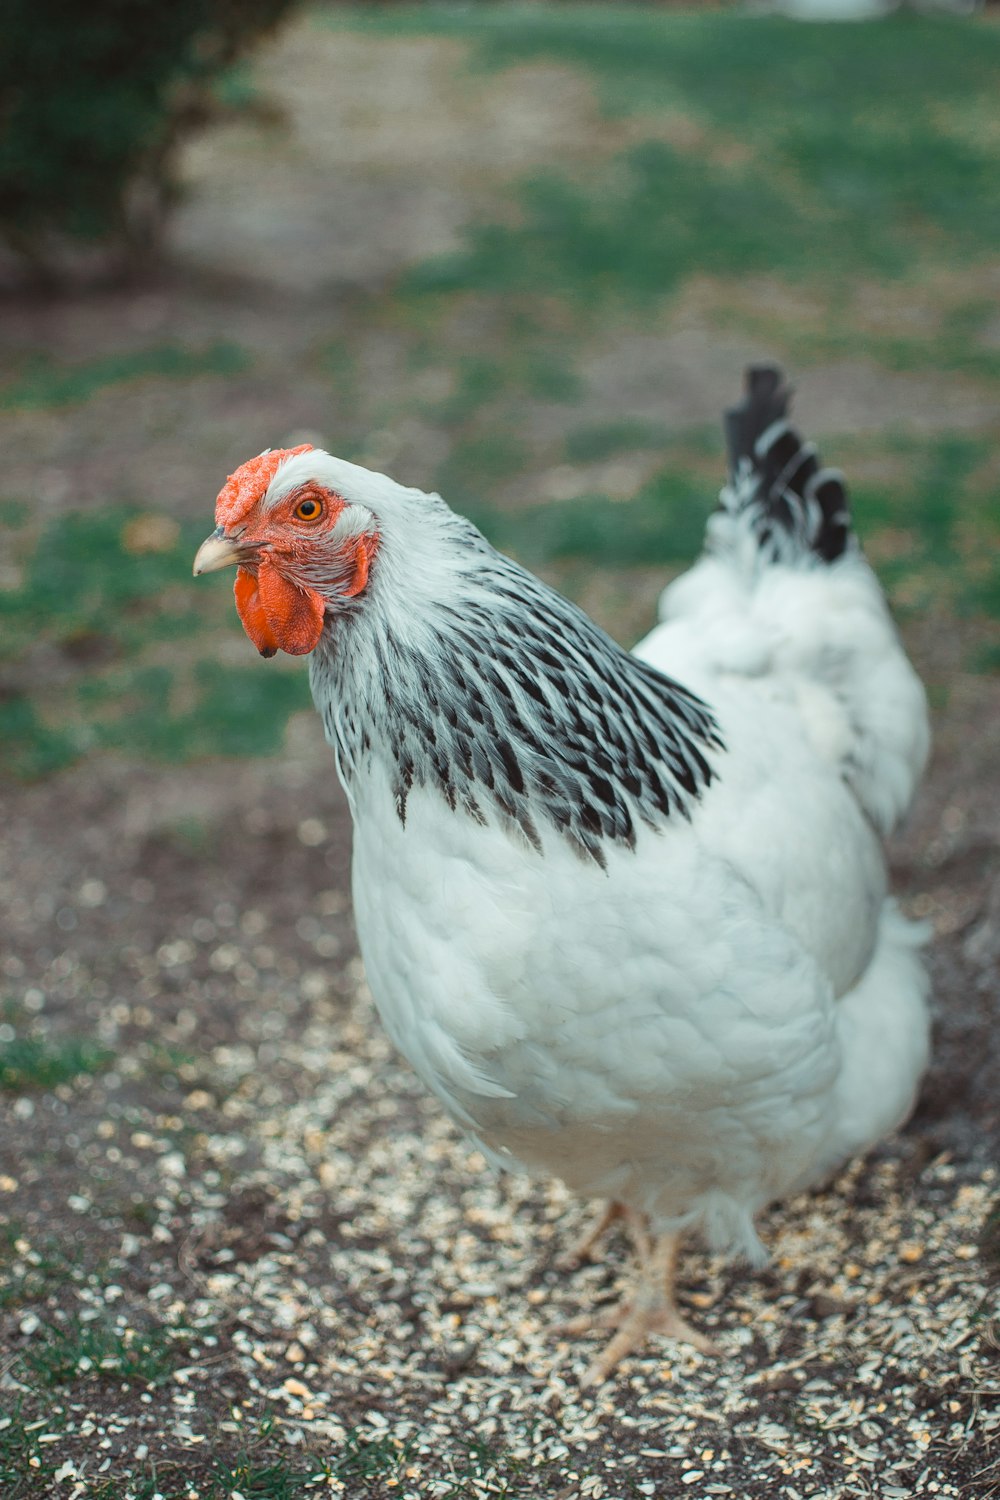 white and black chicken in close-up photo